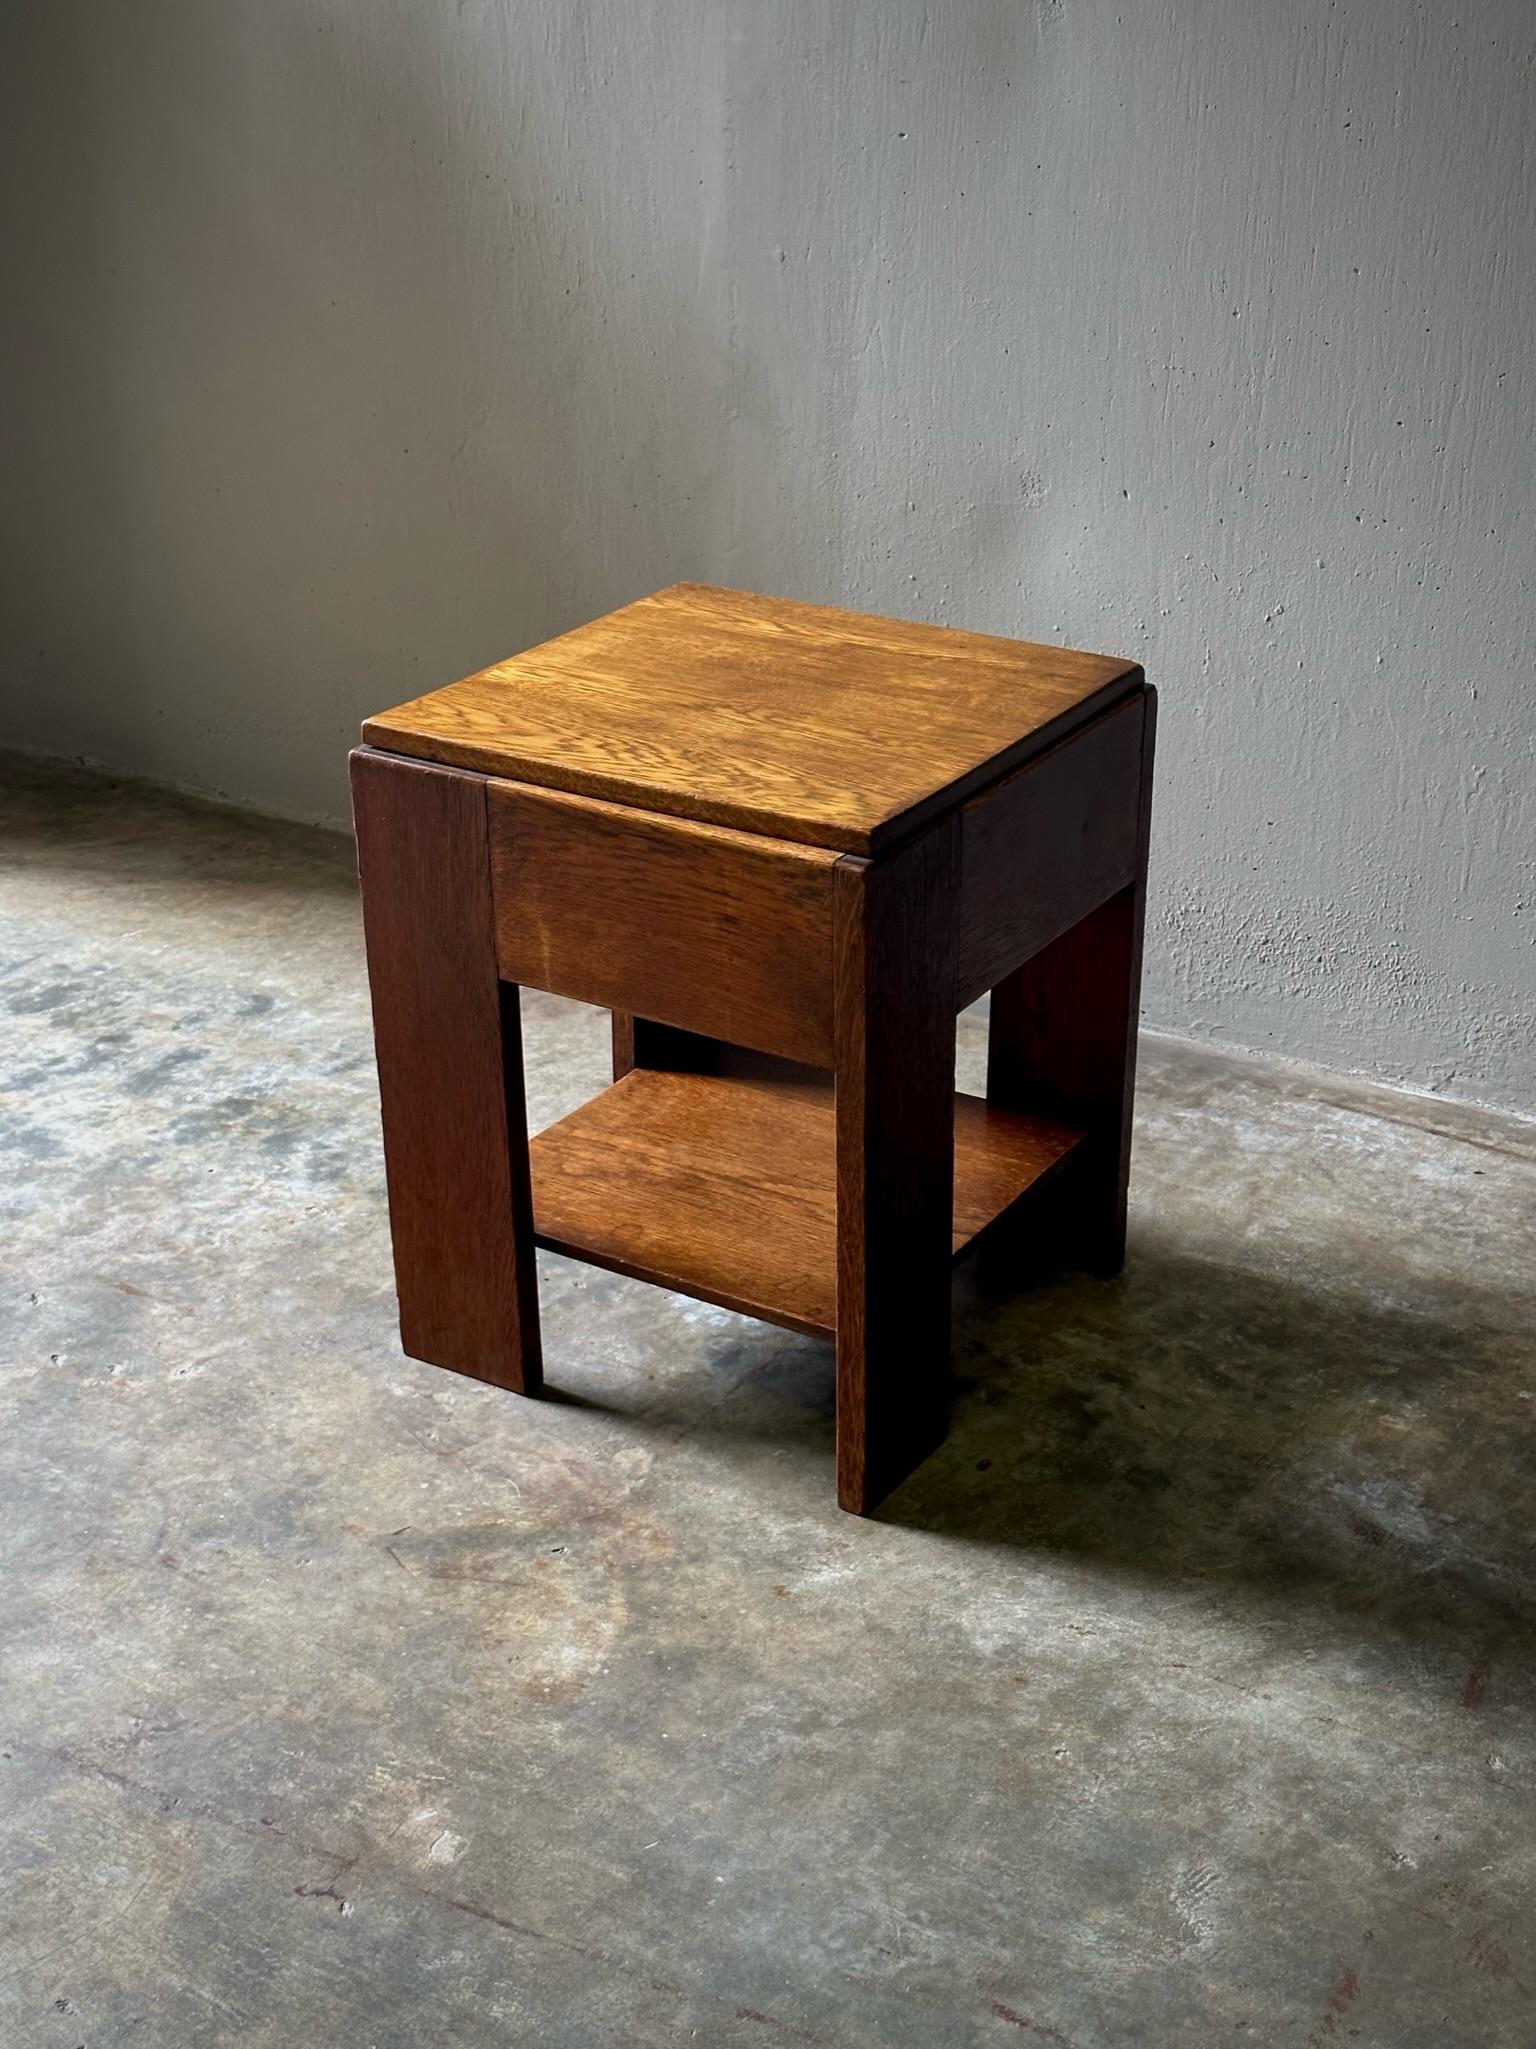 1920s Dutch wood side table with square top, chunky straight legs, and thin lower shelf. A wonderful example of the modernist sensibility the Haagse School was known for, the table emphasizes its materiality with a handsome, minimalist